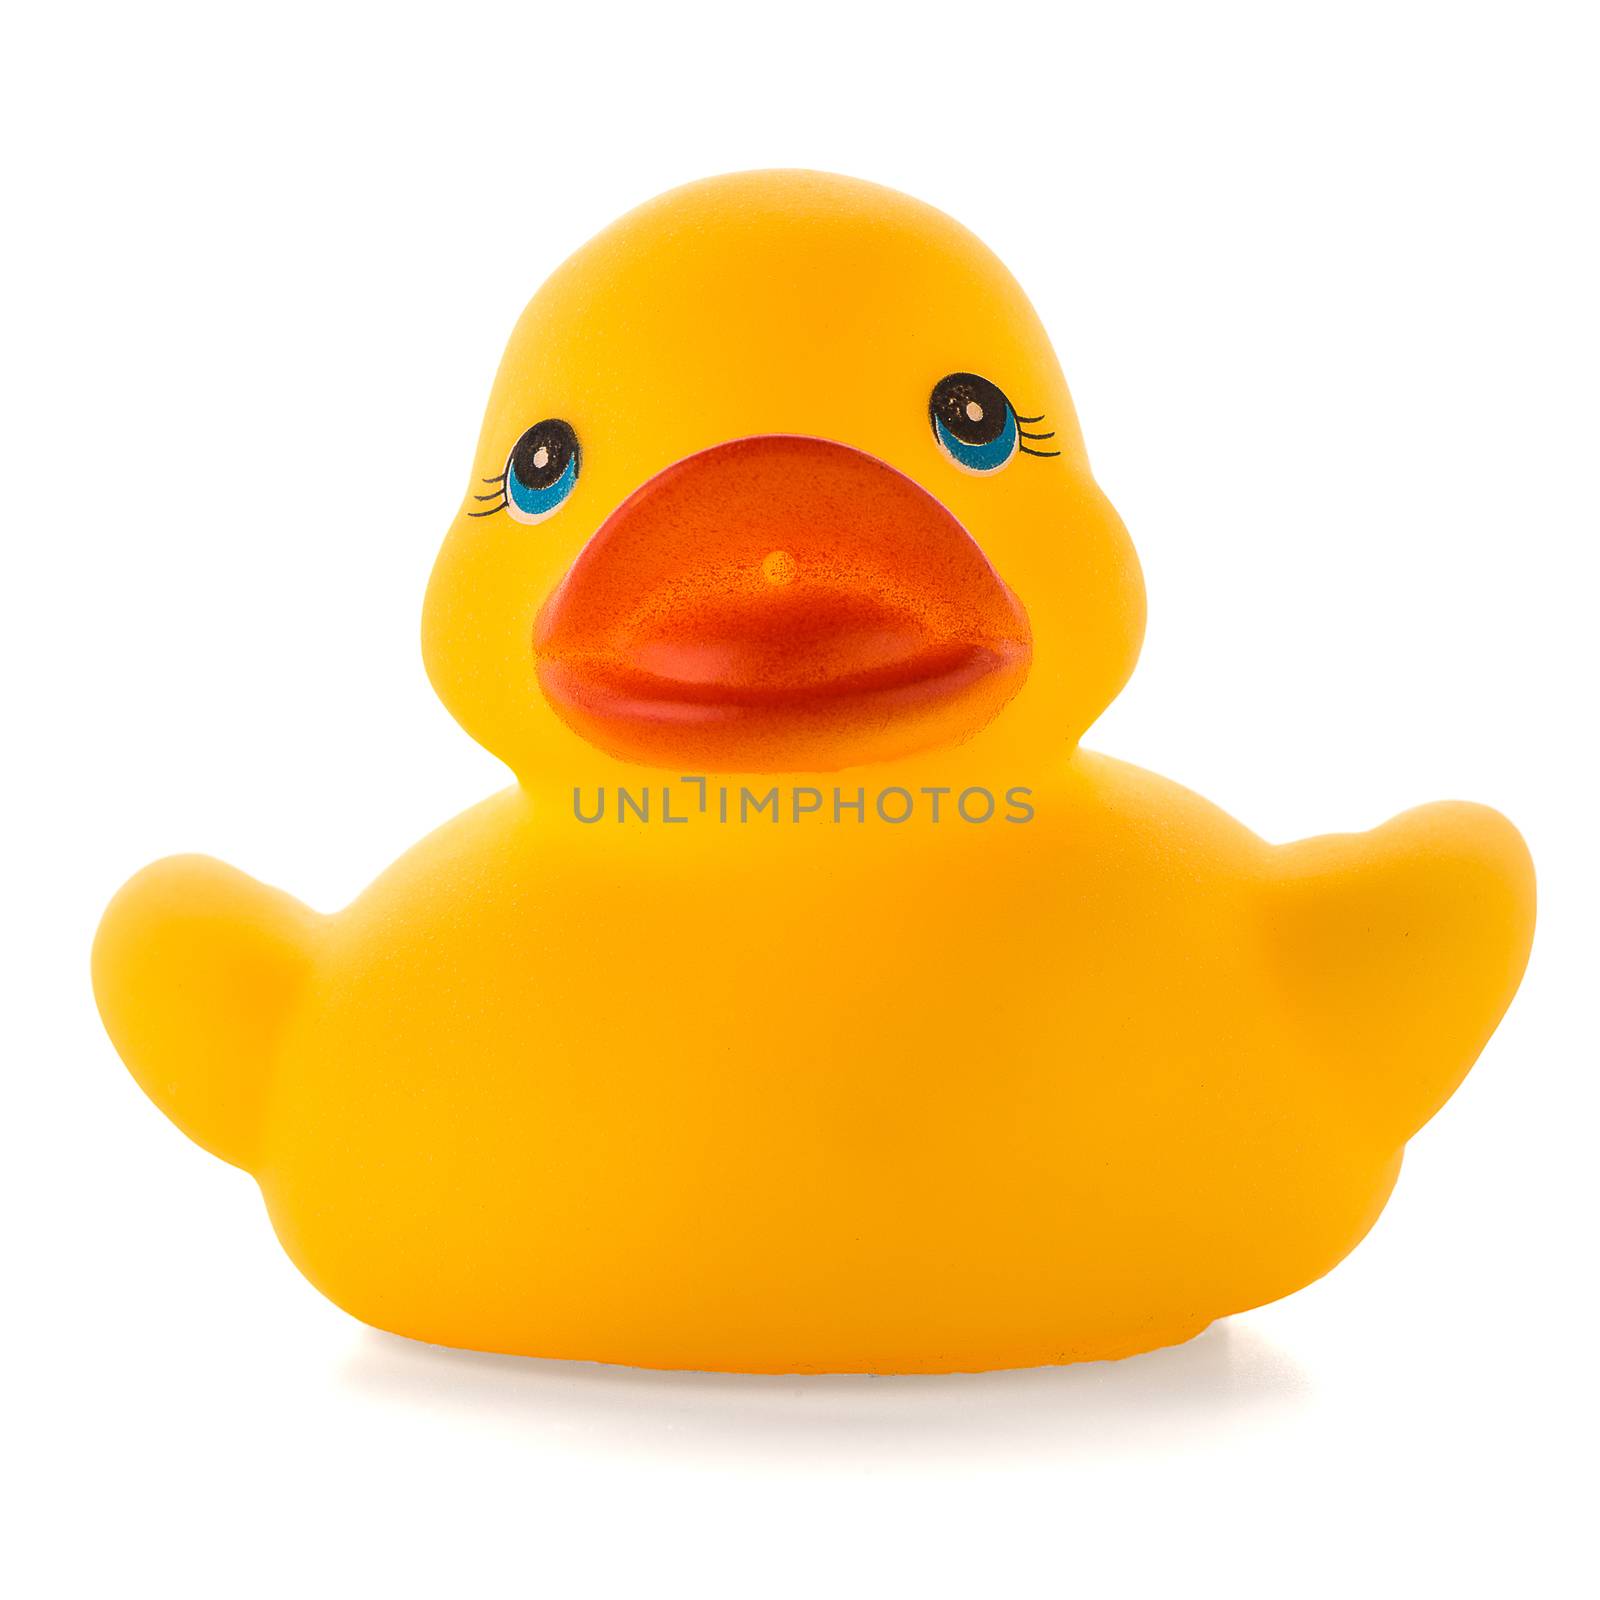 Yellow rubber duck isolated on white background.